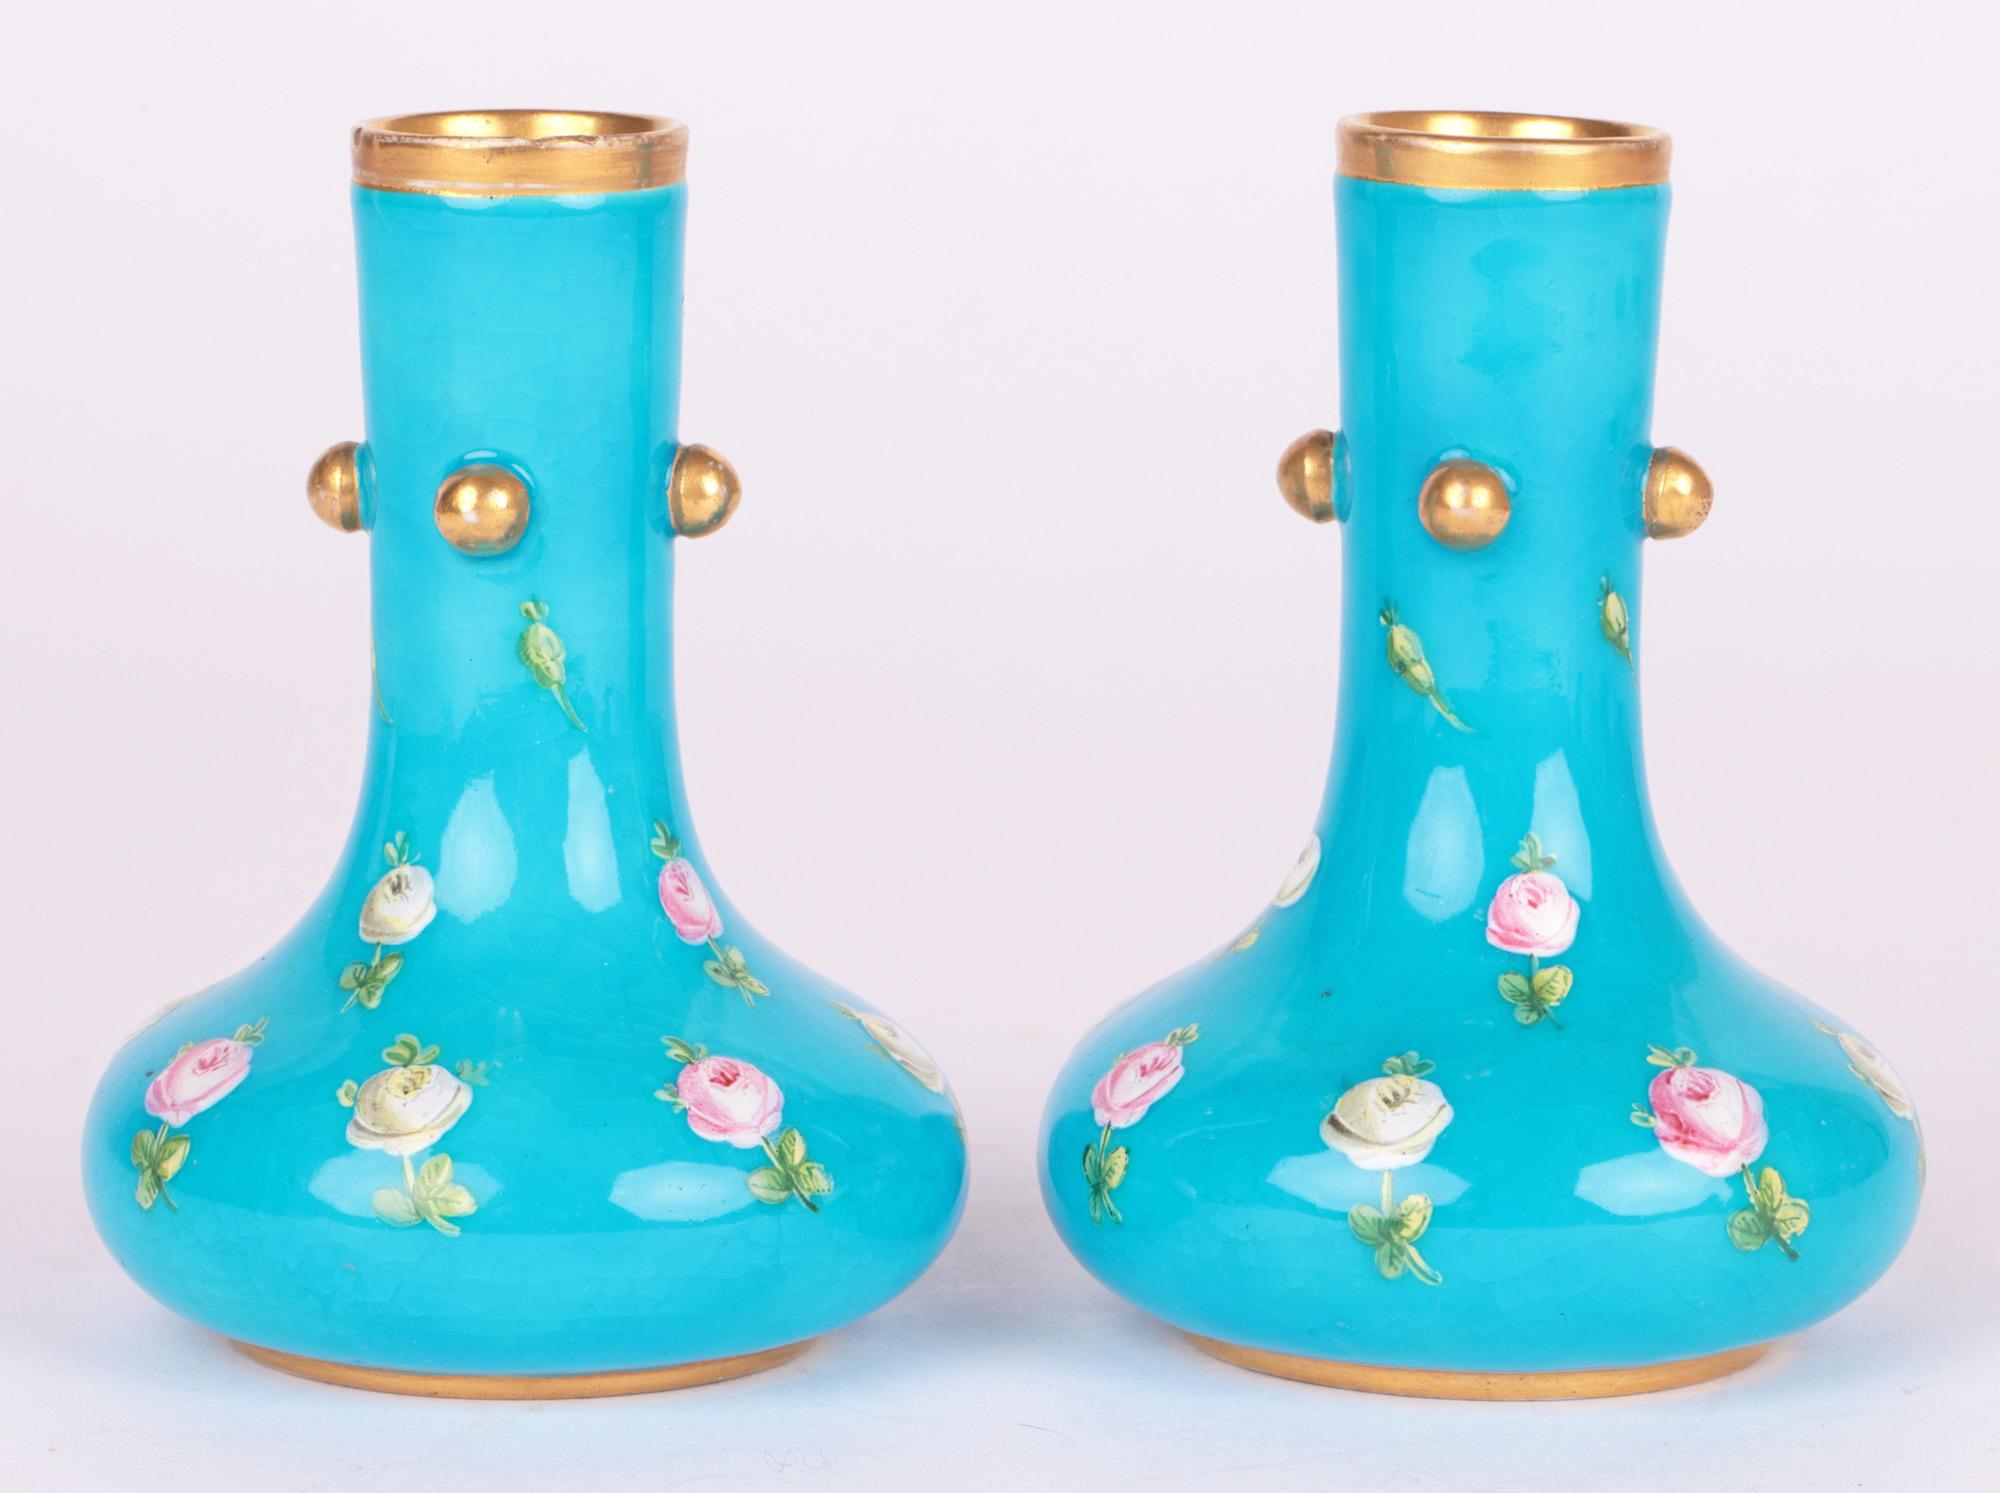 Christopher Dresser for Minton Pair Turquoise Floral Painted Vases 2